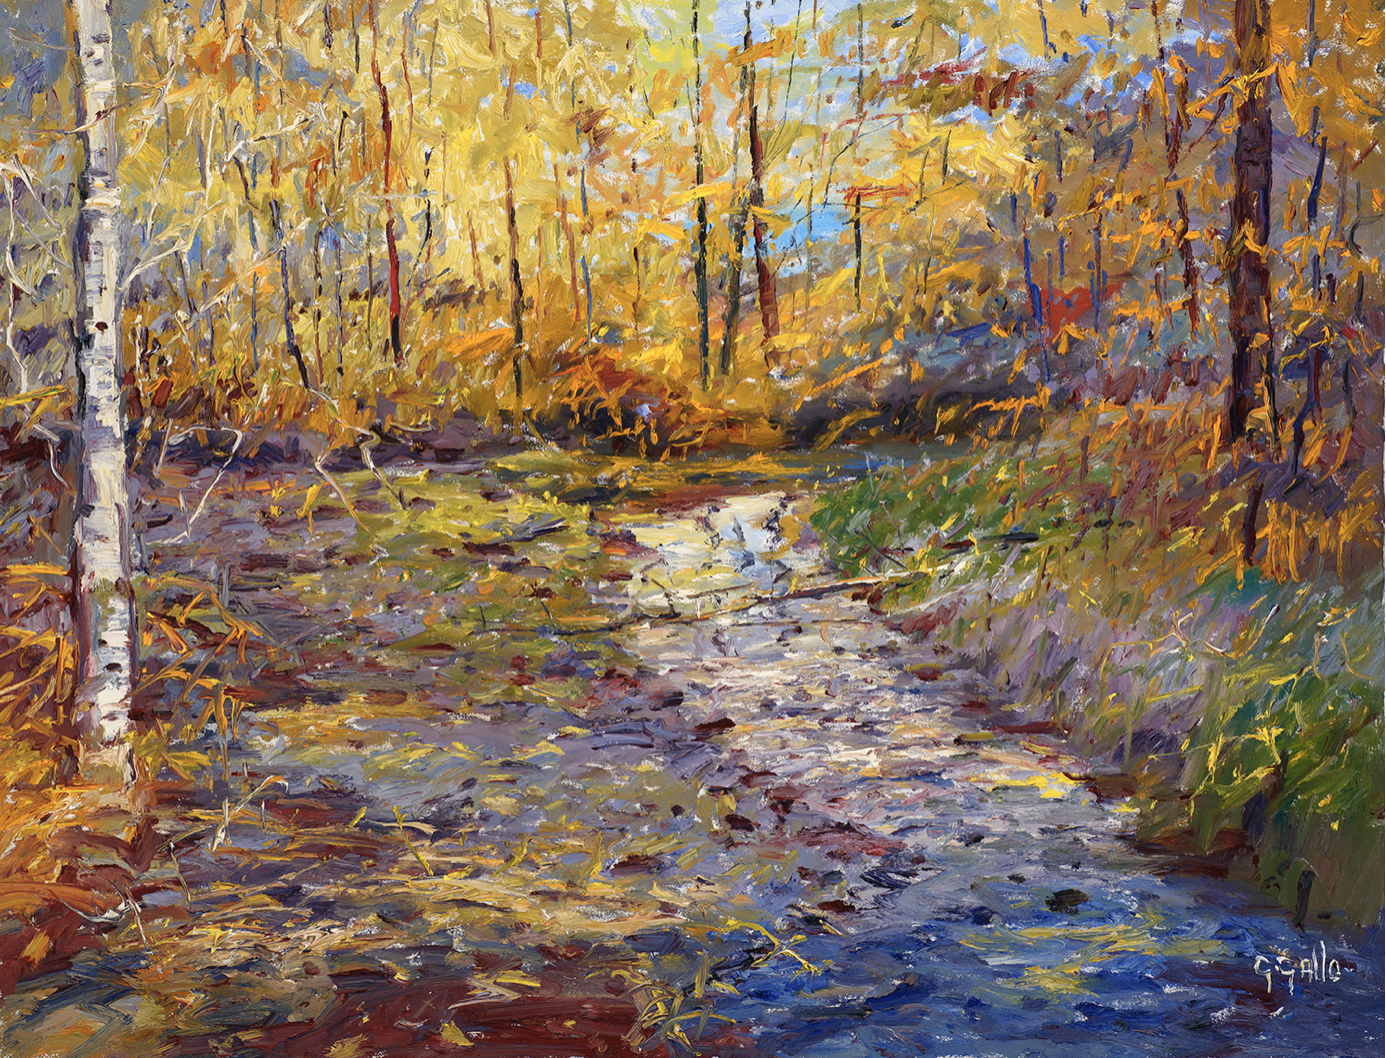 George Gallo, Stream at New Hope, oil on canvas, 38 x 50 in.